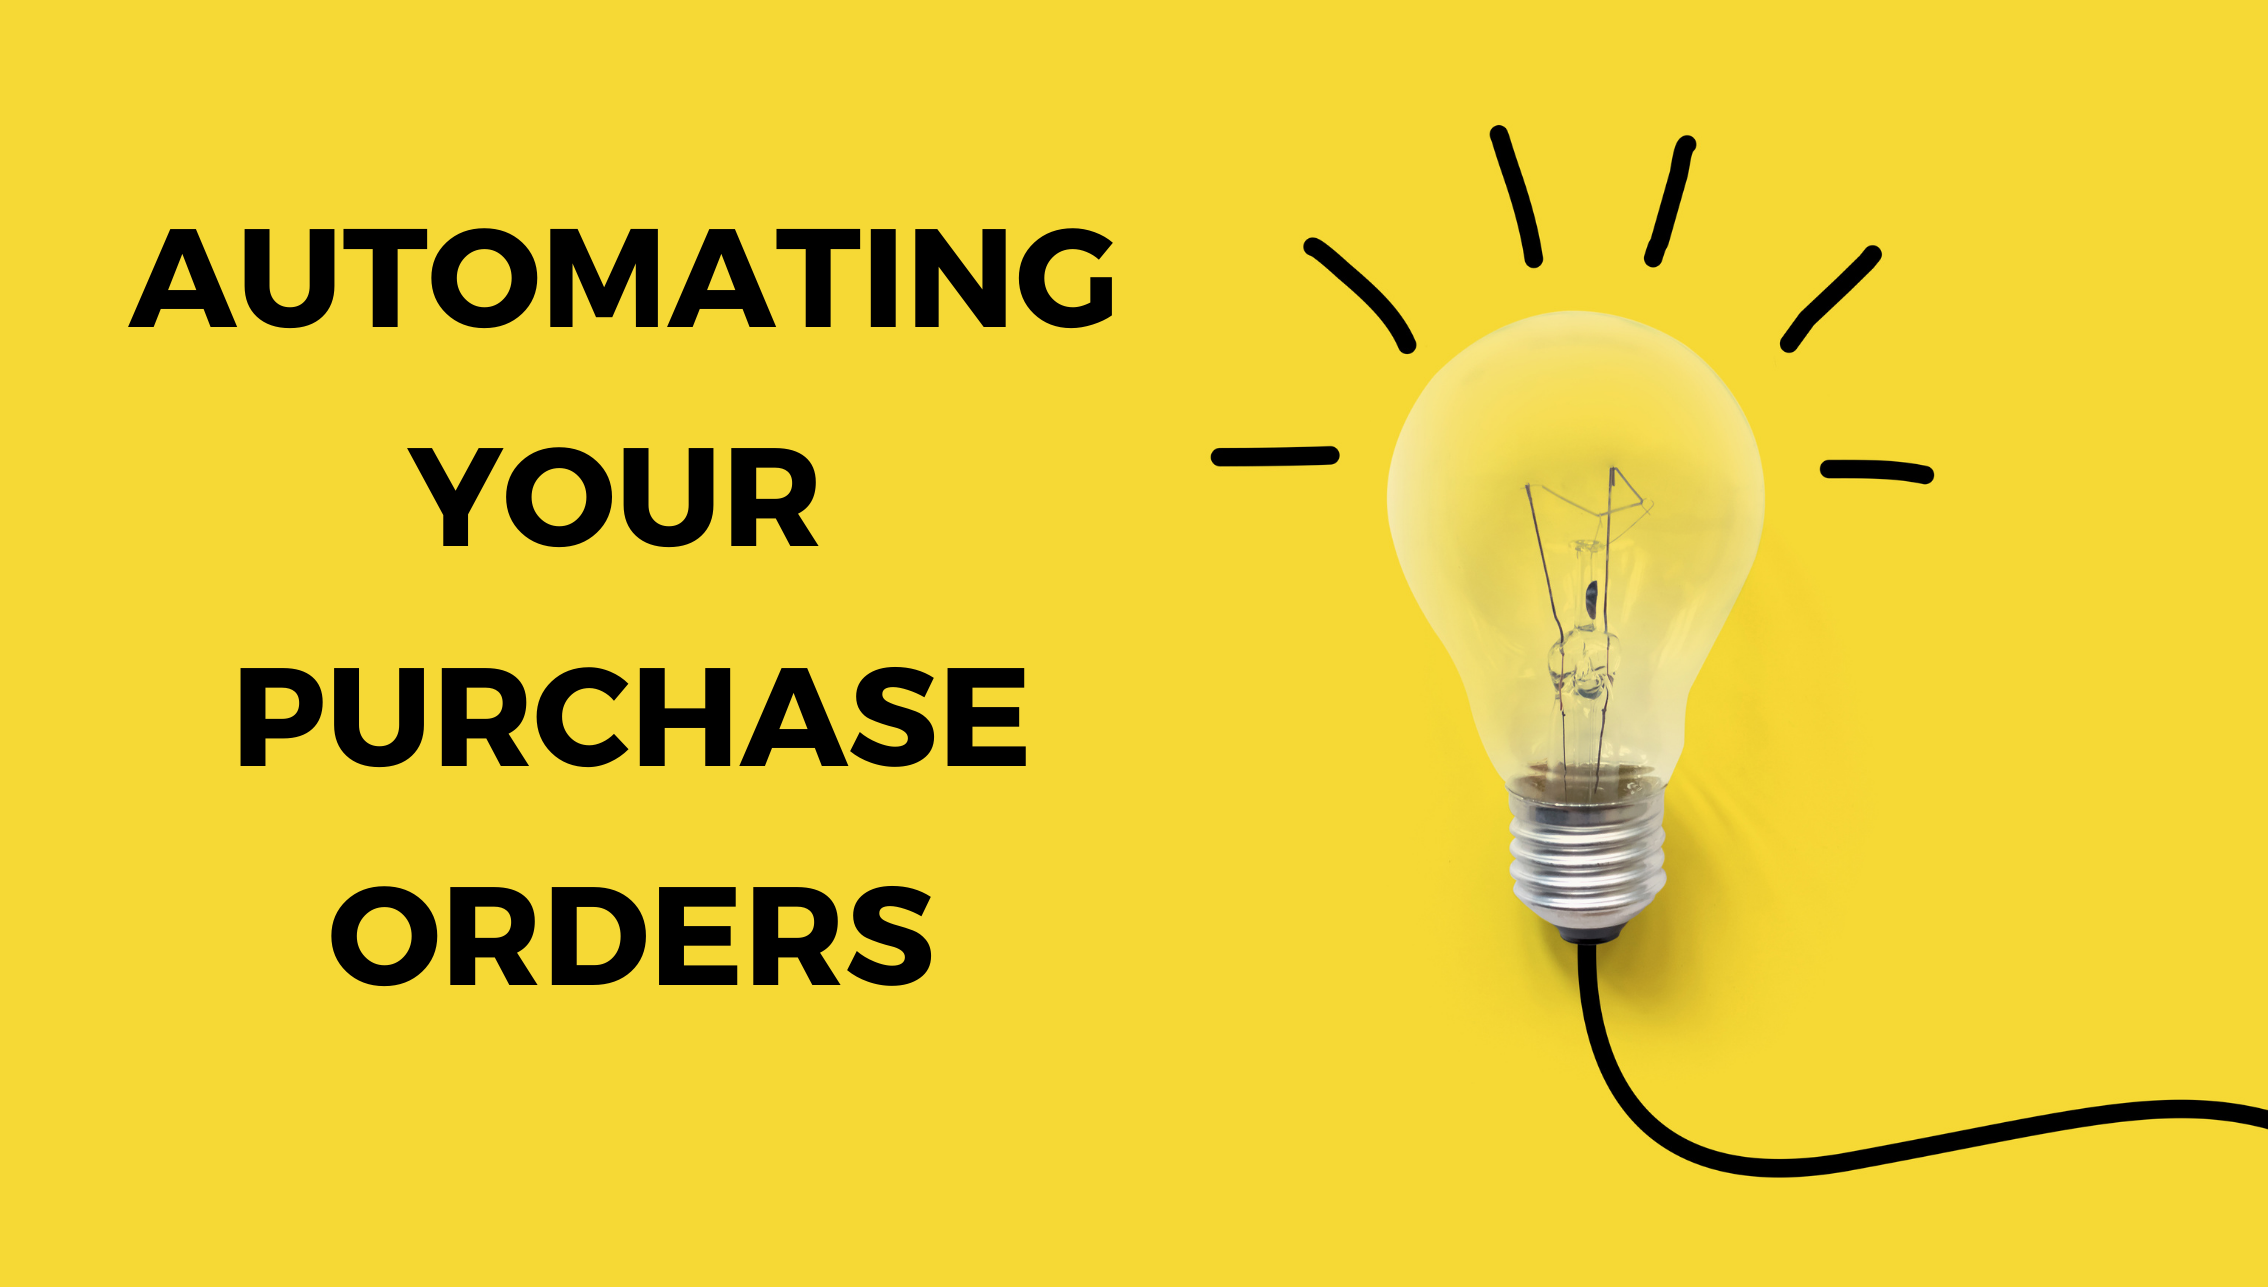 Purchase Order Software: Why Automation Is the Way Forward